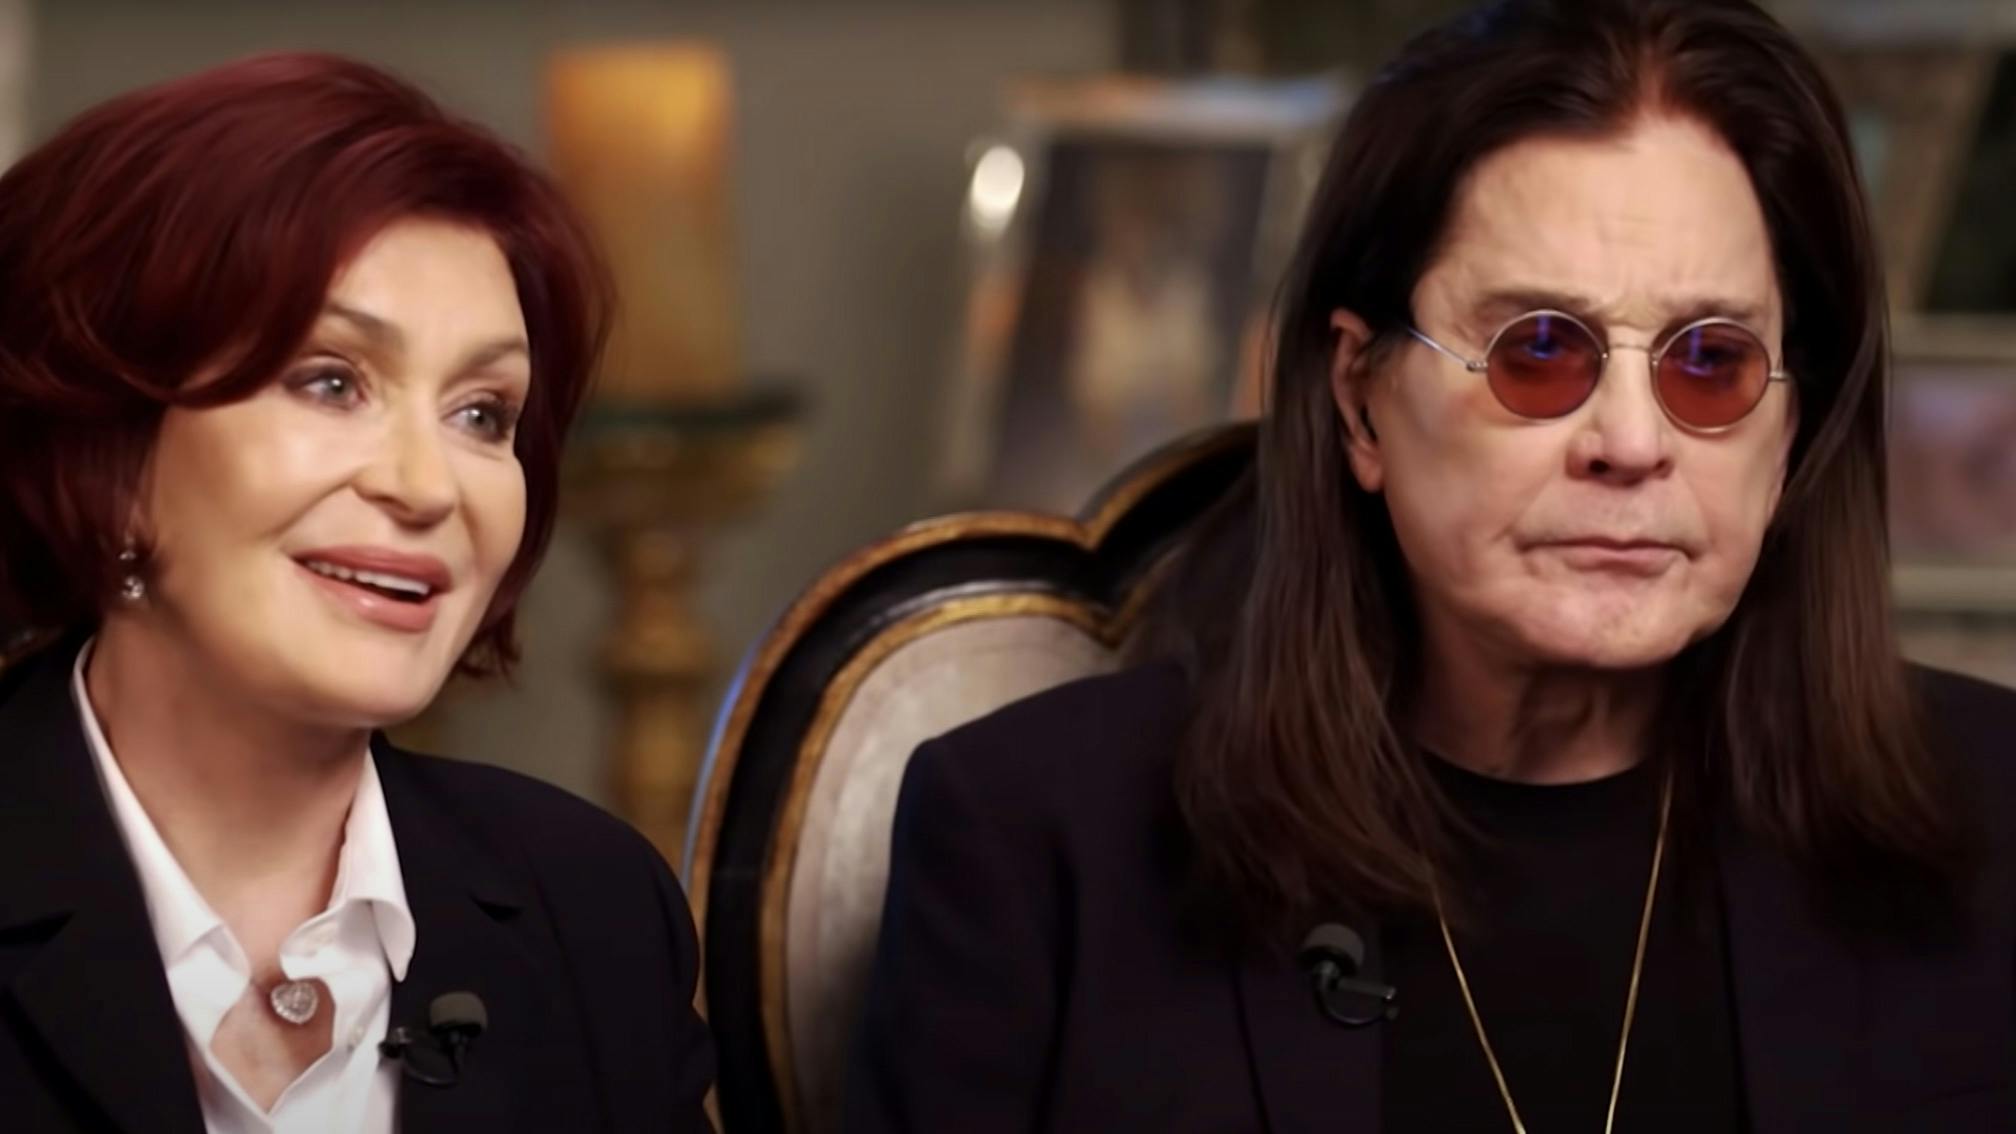 There's An Ozzy And Sharon Osbourne Biopic In The Works